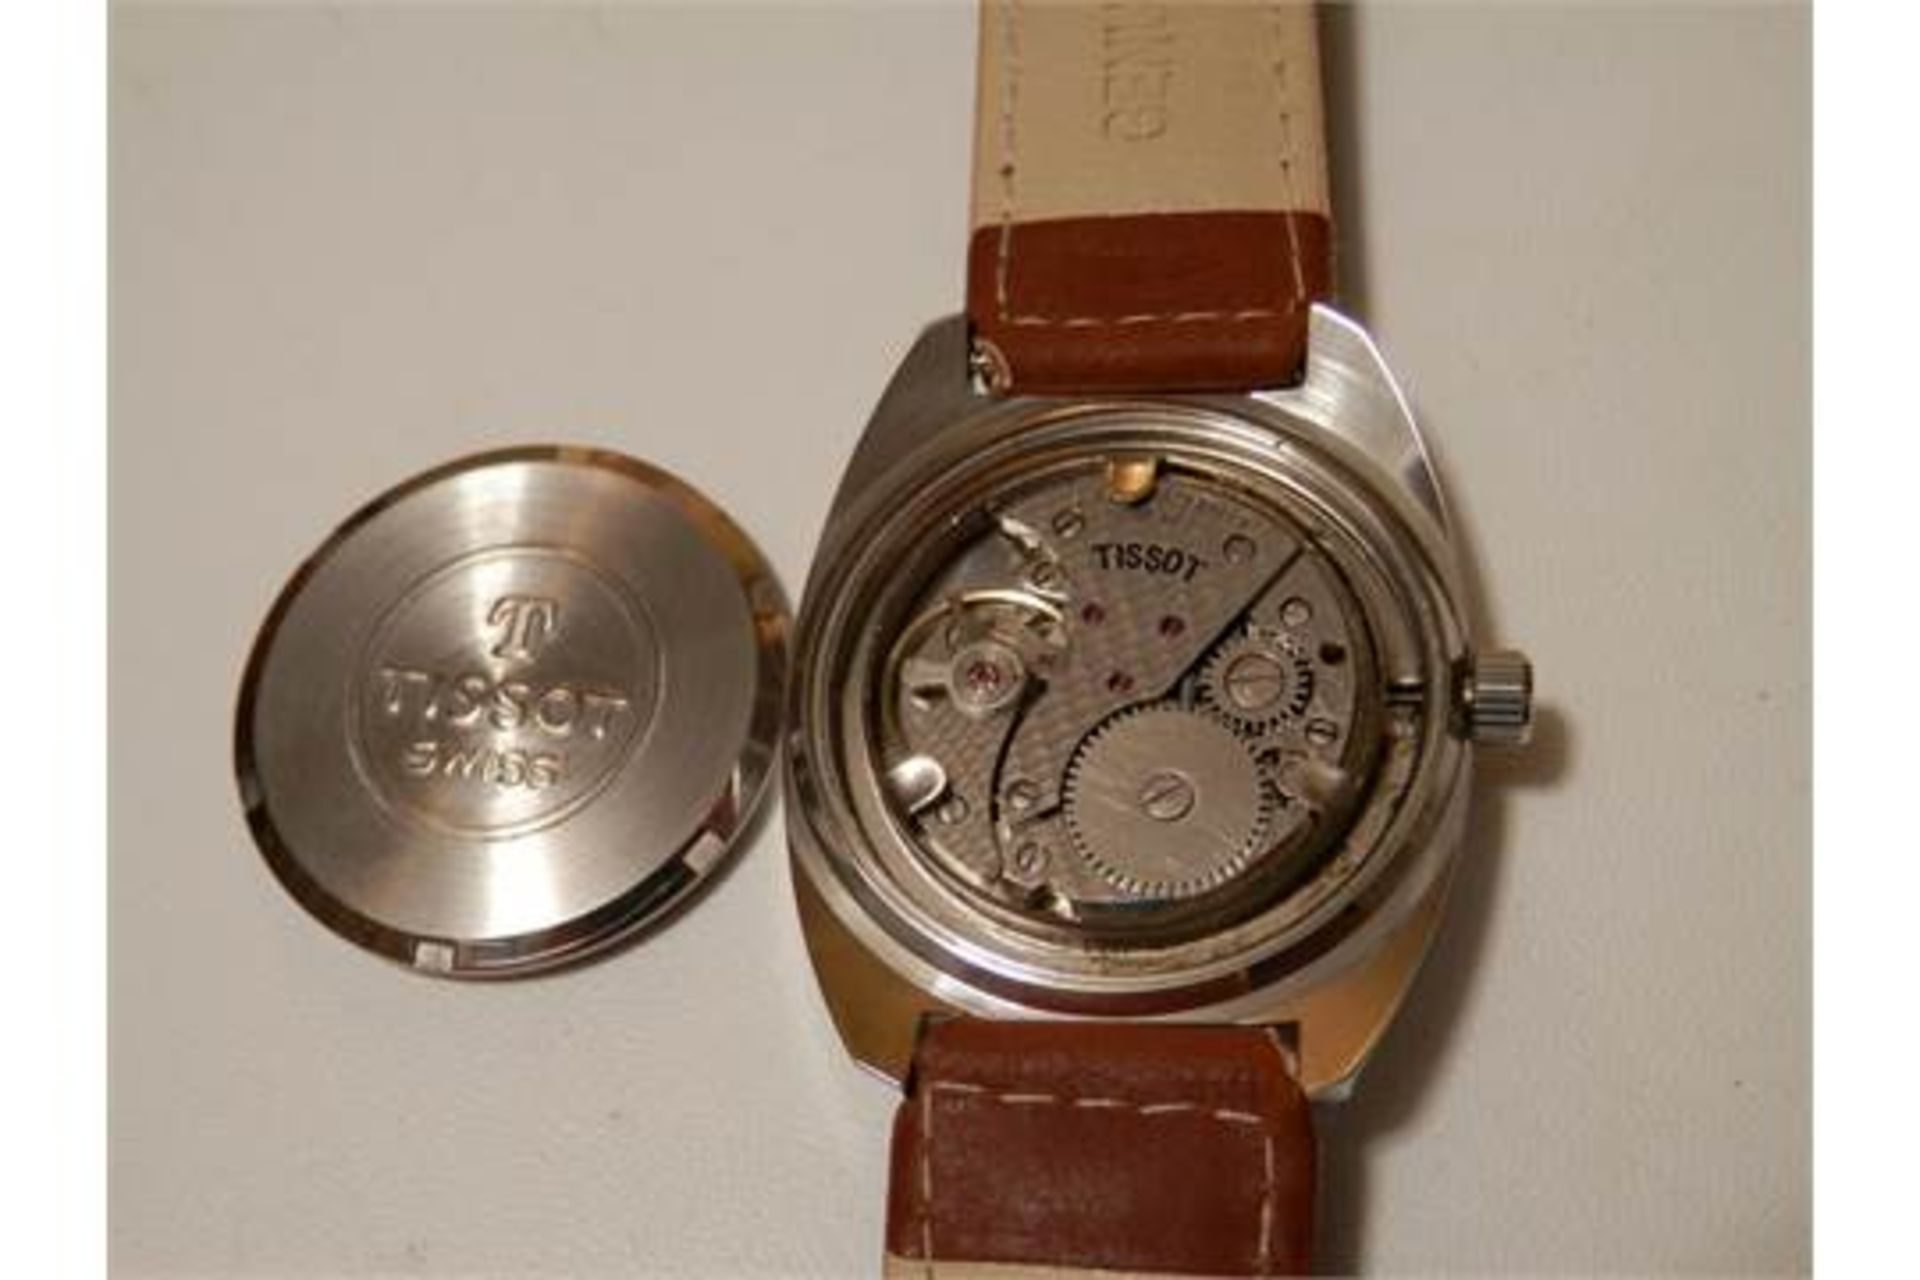 SUPERB GENTS TISSOT SEASTAR, POSSIBLY NEW/OLD STOCK 1970S 17 JEWEL SWISS WATCH (#2 of 3 available) - Image 6 of 10